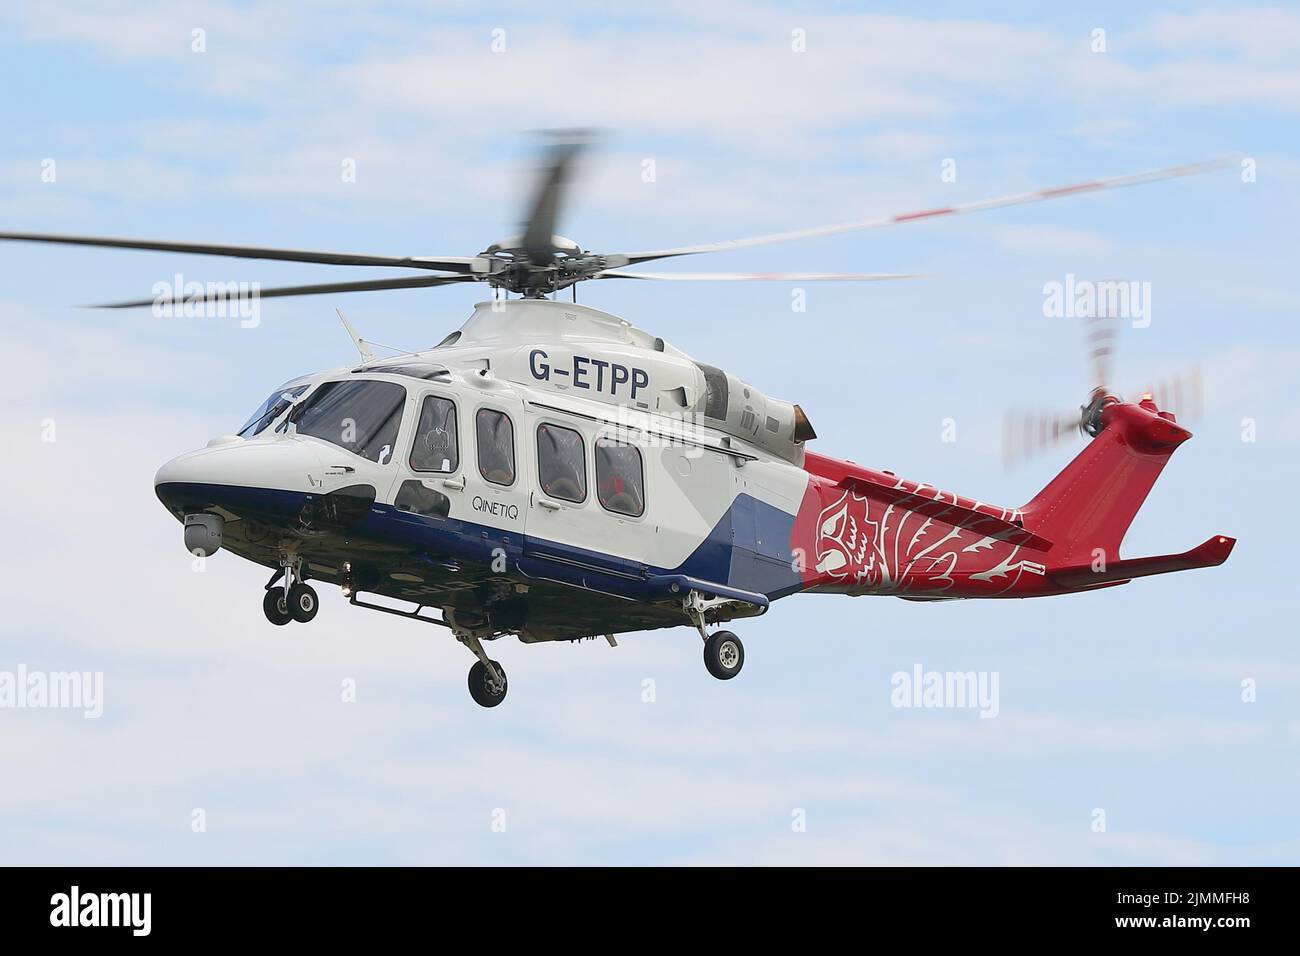 AgustaWestland AW139 G-ETPP helicopter at the Royal International Air Tattoo RIAT 2022 at RAF Fairford, UK Stock Photo